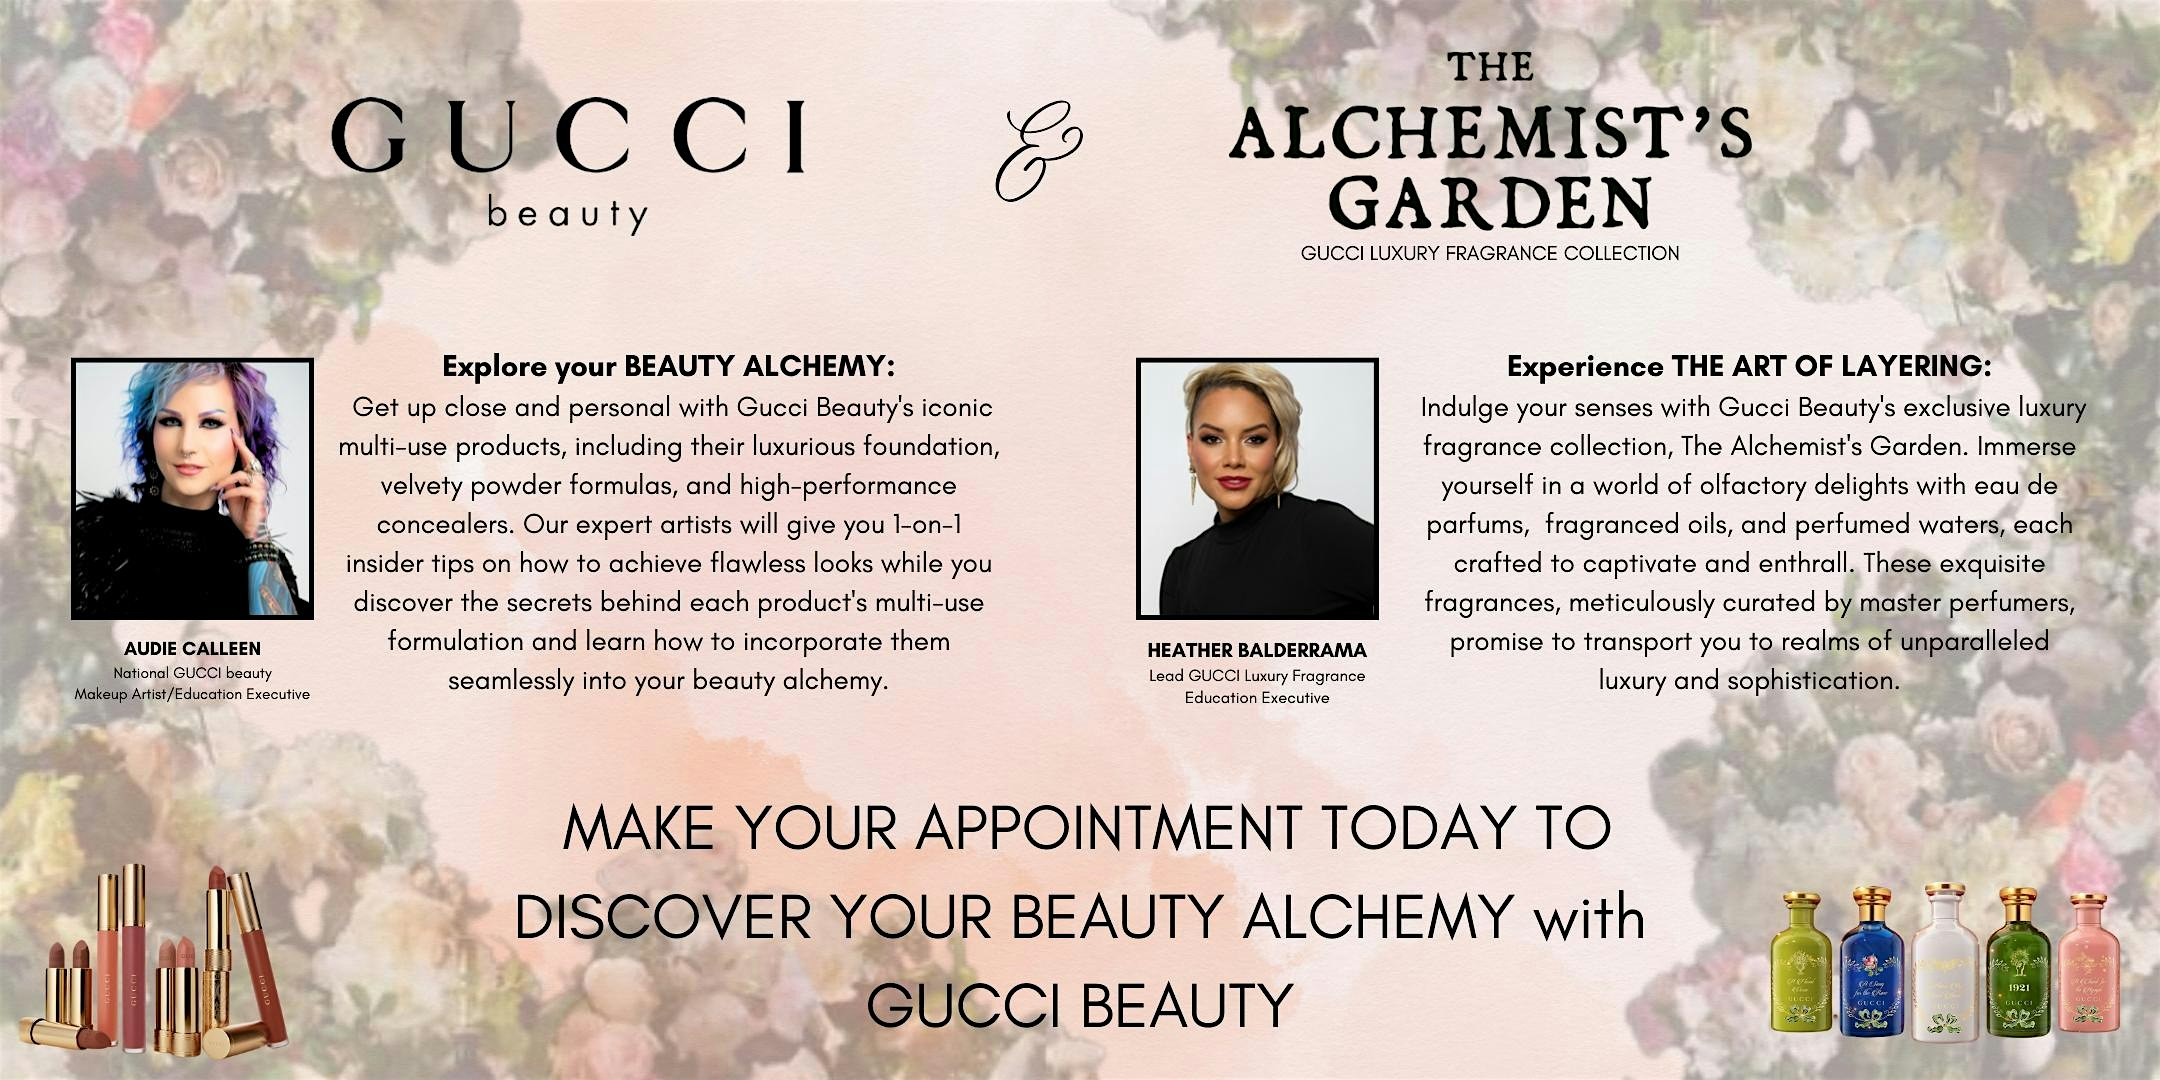 WORLD OF GUCCI - BEAUTY ALCHEMY EXPERIENCE at Nordstrom Bellevue